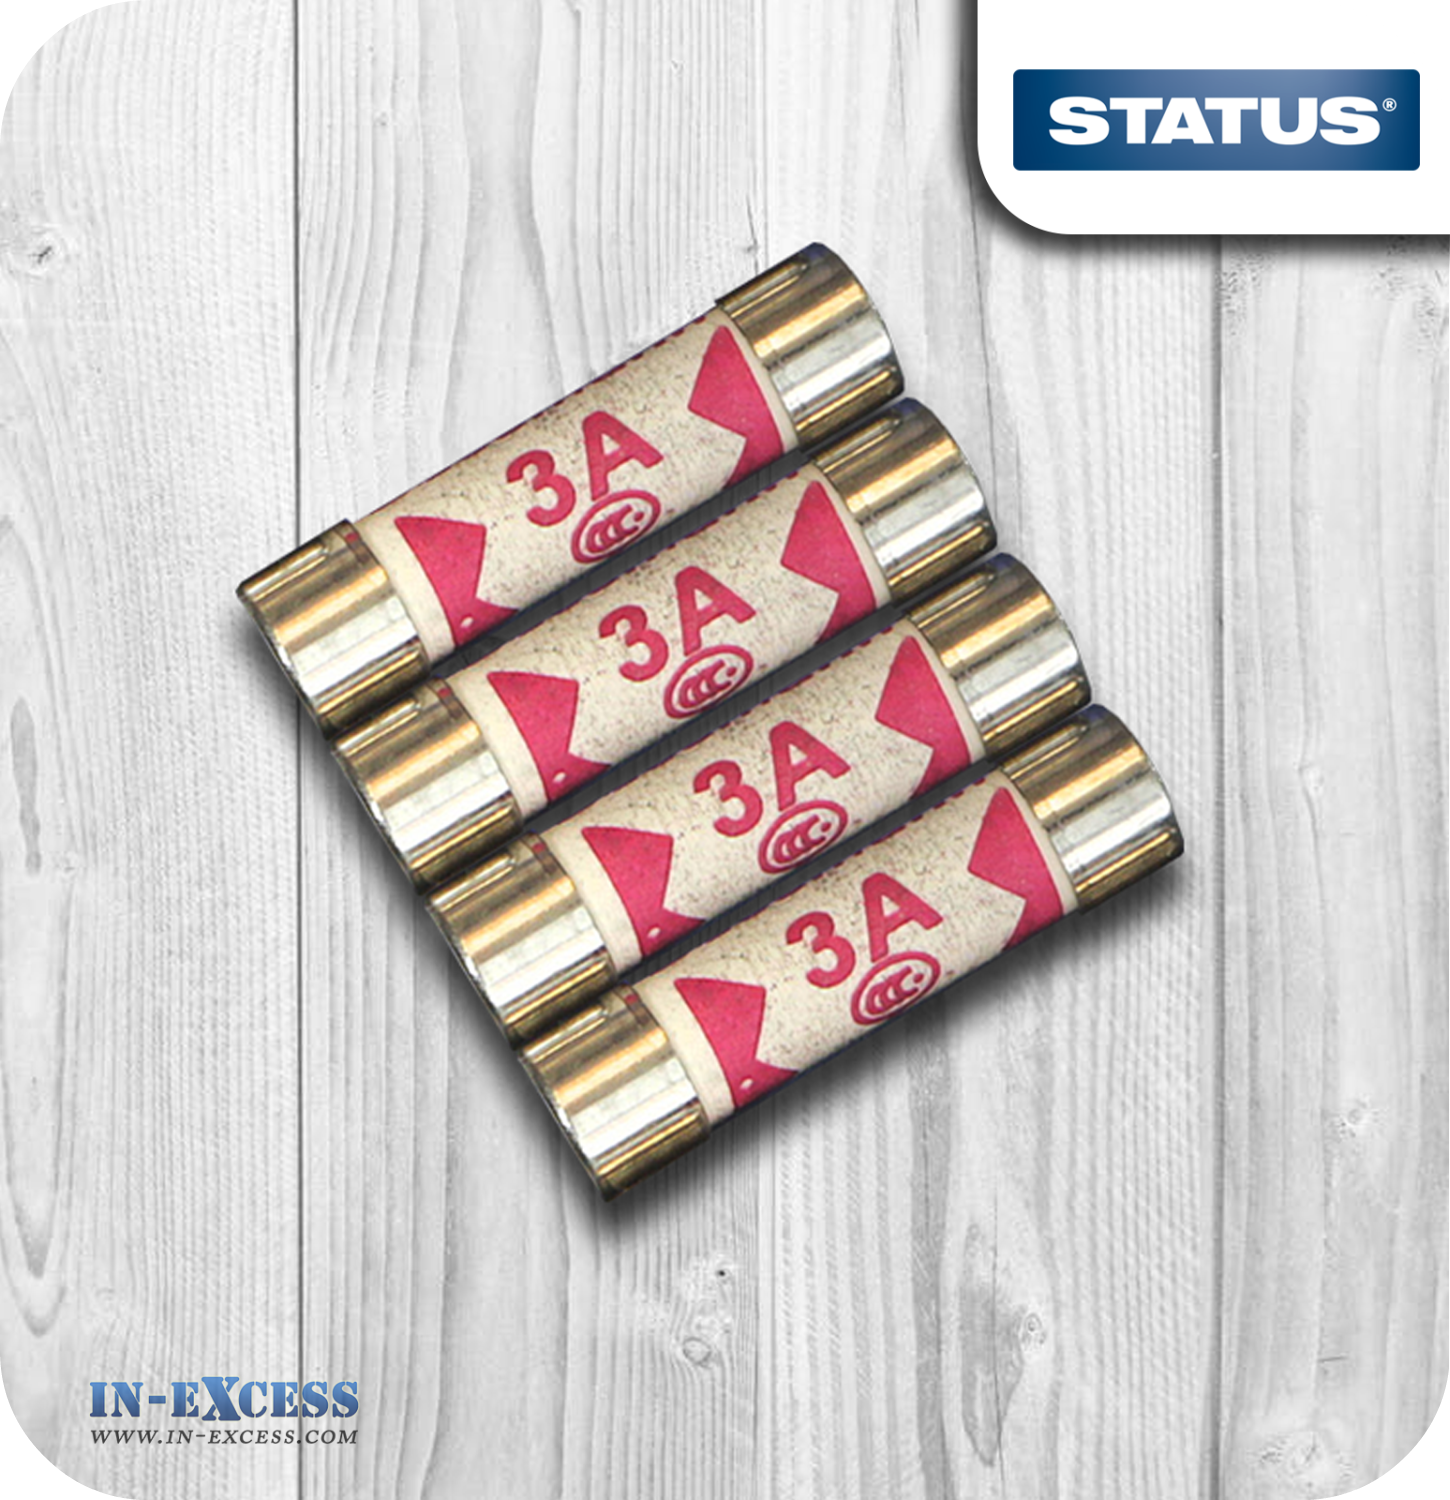 Status 3 Amp Replacement Fuses - Pack of 4